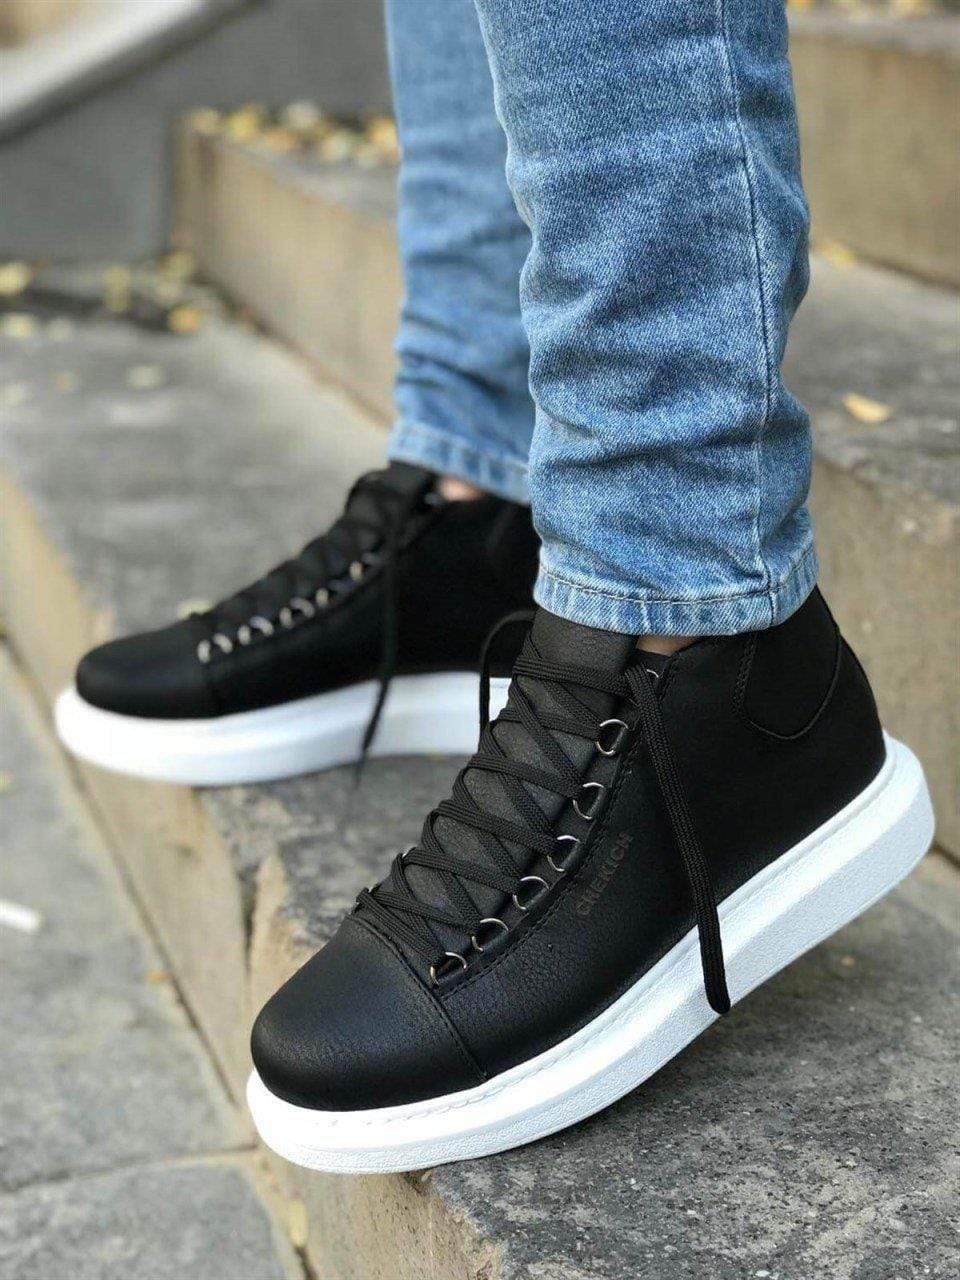 Buy DICY Shoes for Women Casual High Heel Sneakers for Girls Low Top High  Sole Black at Amazon.in